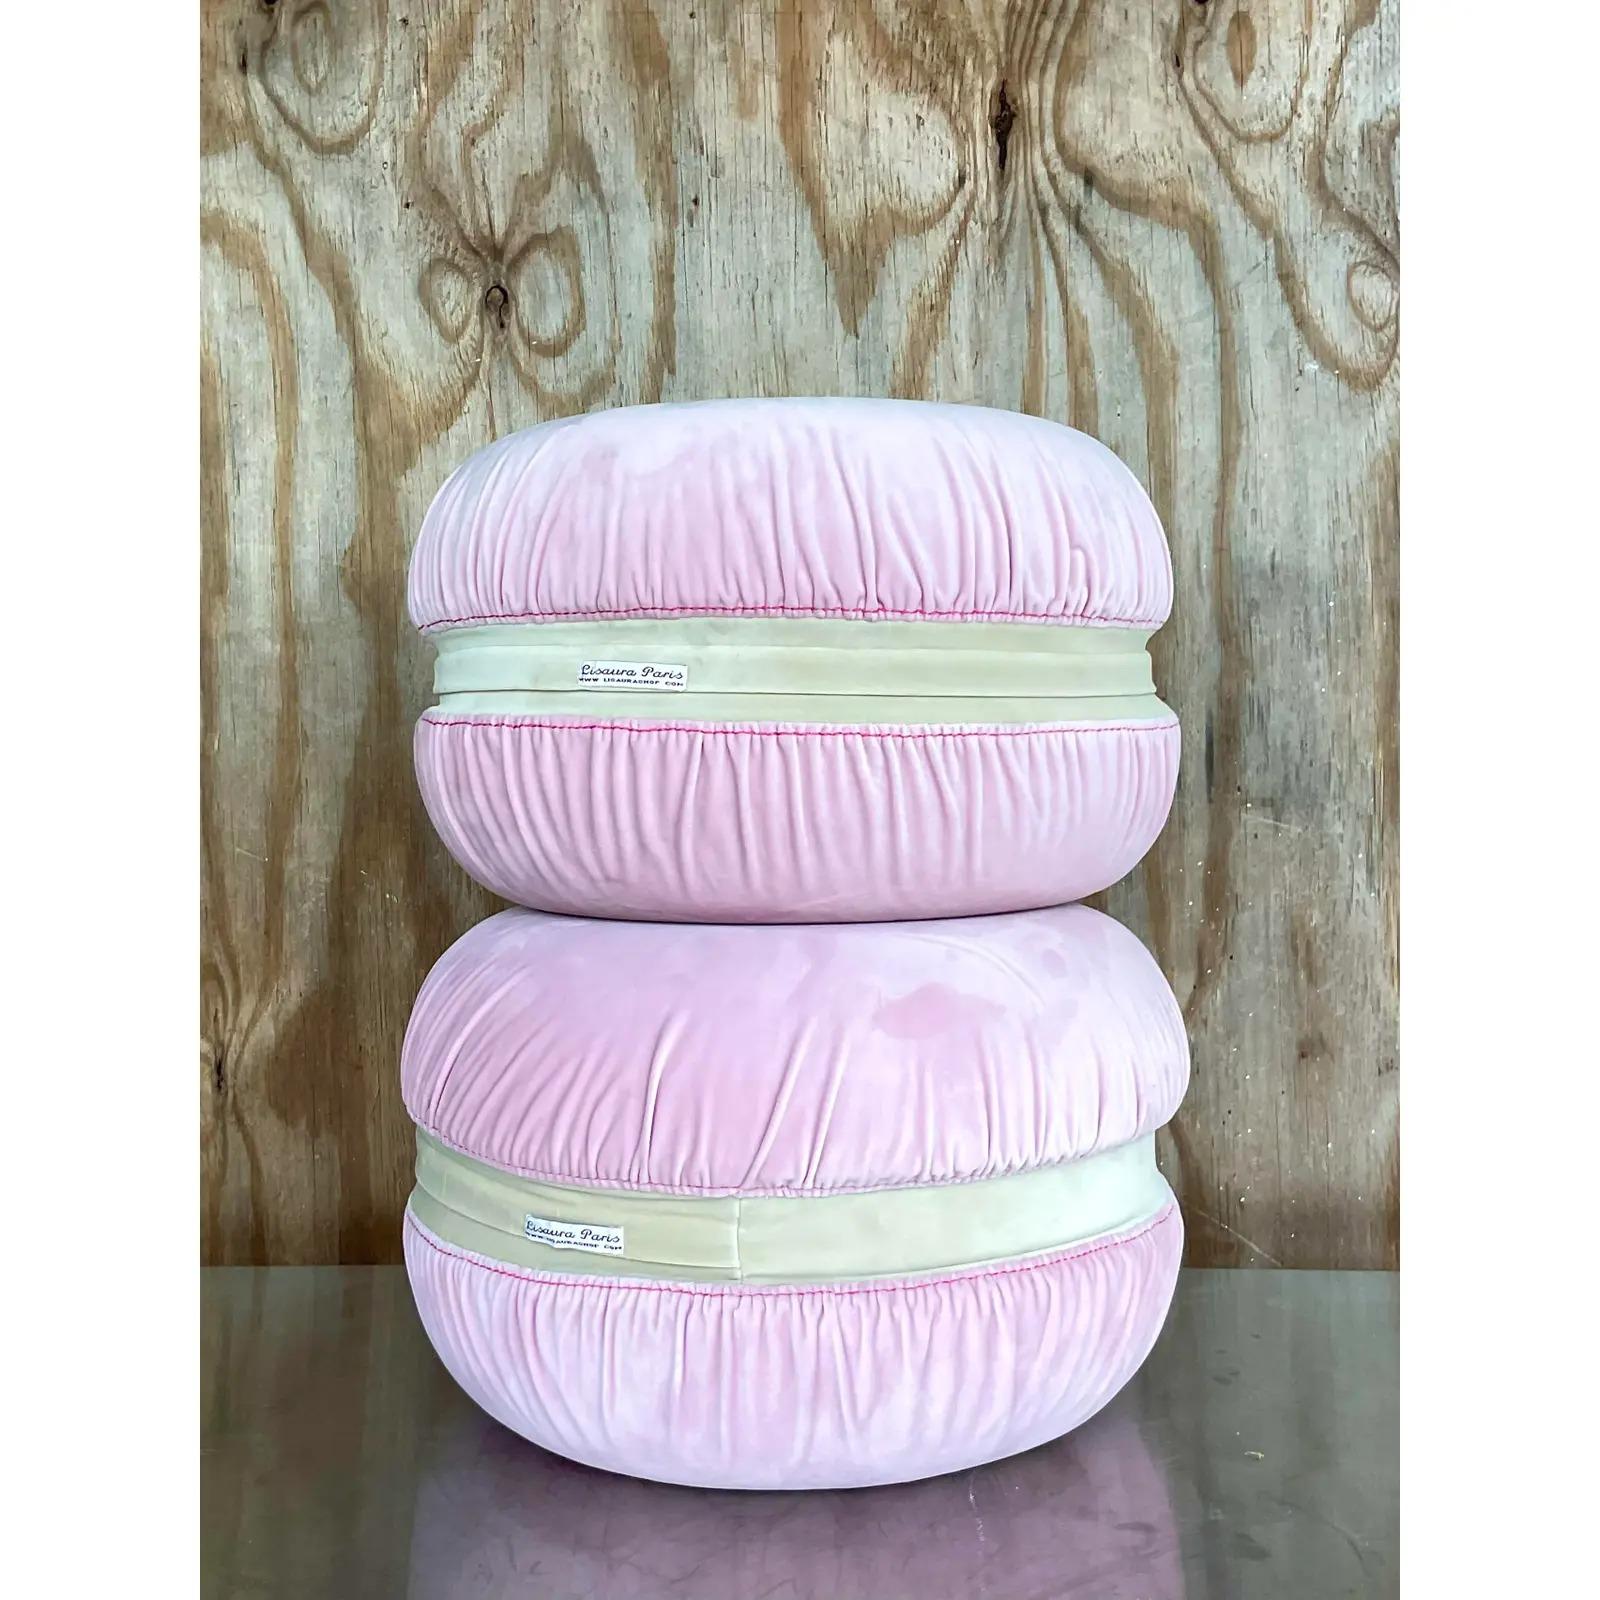 Fantastic pair of new Lisaura Paris children’s poofs. Pale pink washable velvet cover for easy care. Firm foam insert make it great for kids or visiting adults. Acquired from a Palm Beach estate.